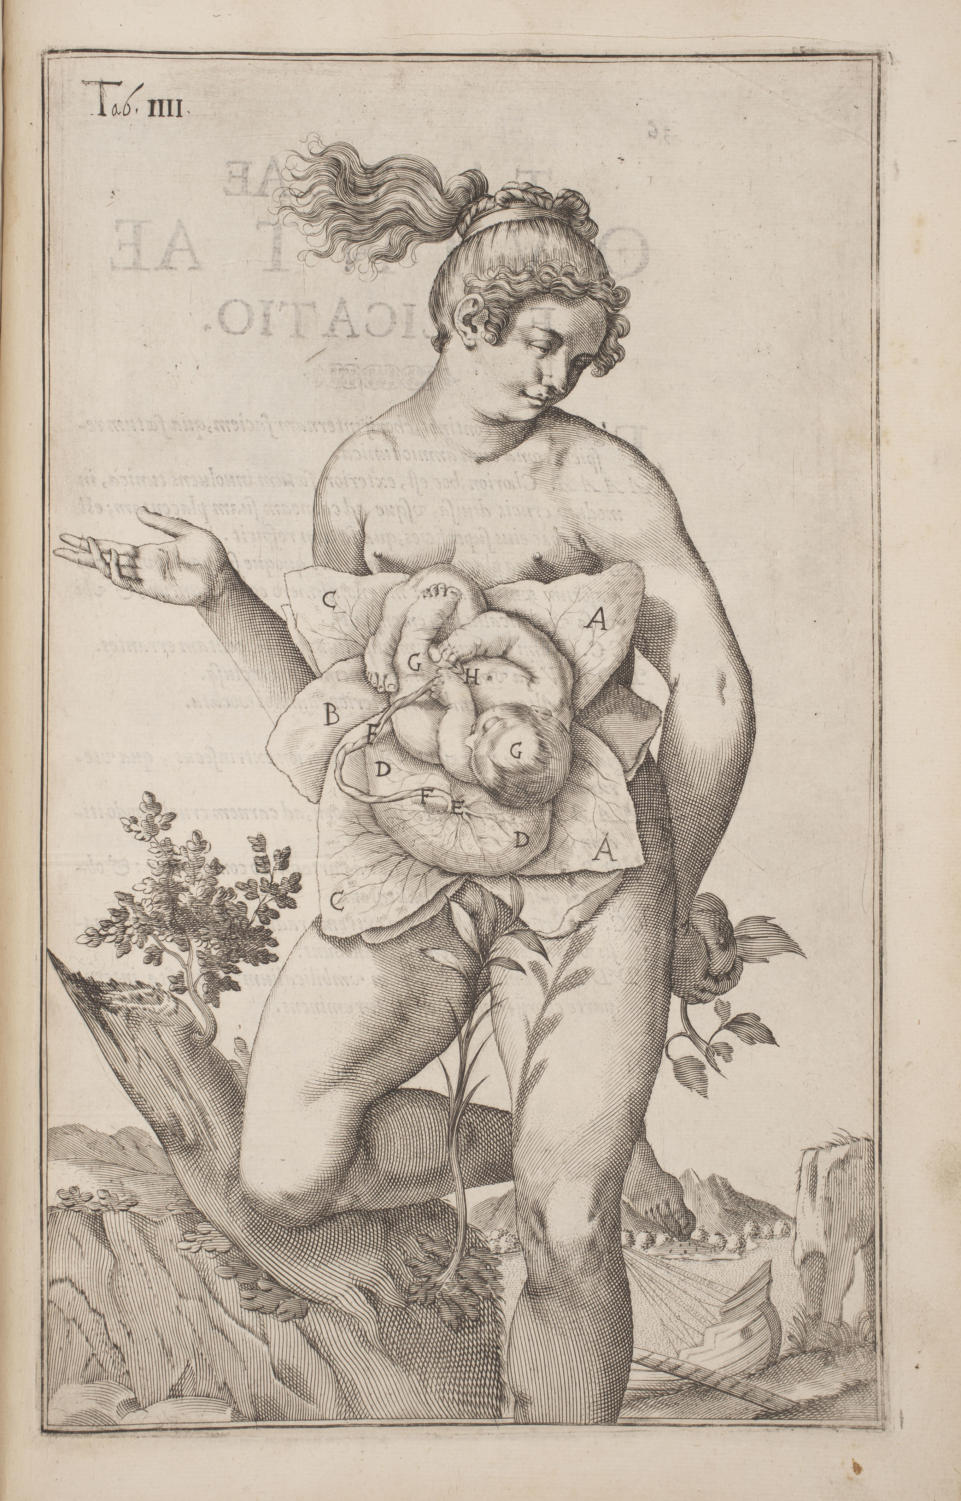 This engraving presents a ‘blooming flower’ fetus cradled by several petals, as if to acknowledge the role of mother nature in nurturing organic life.